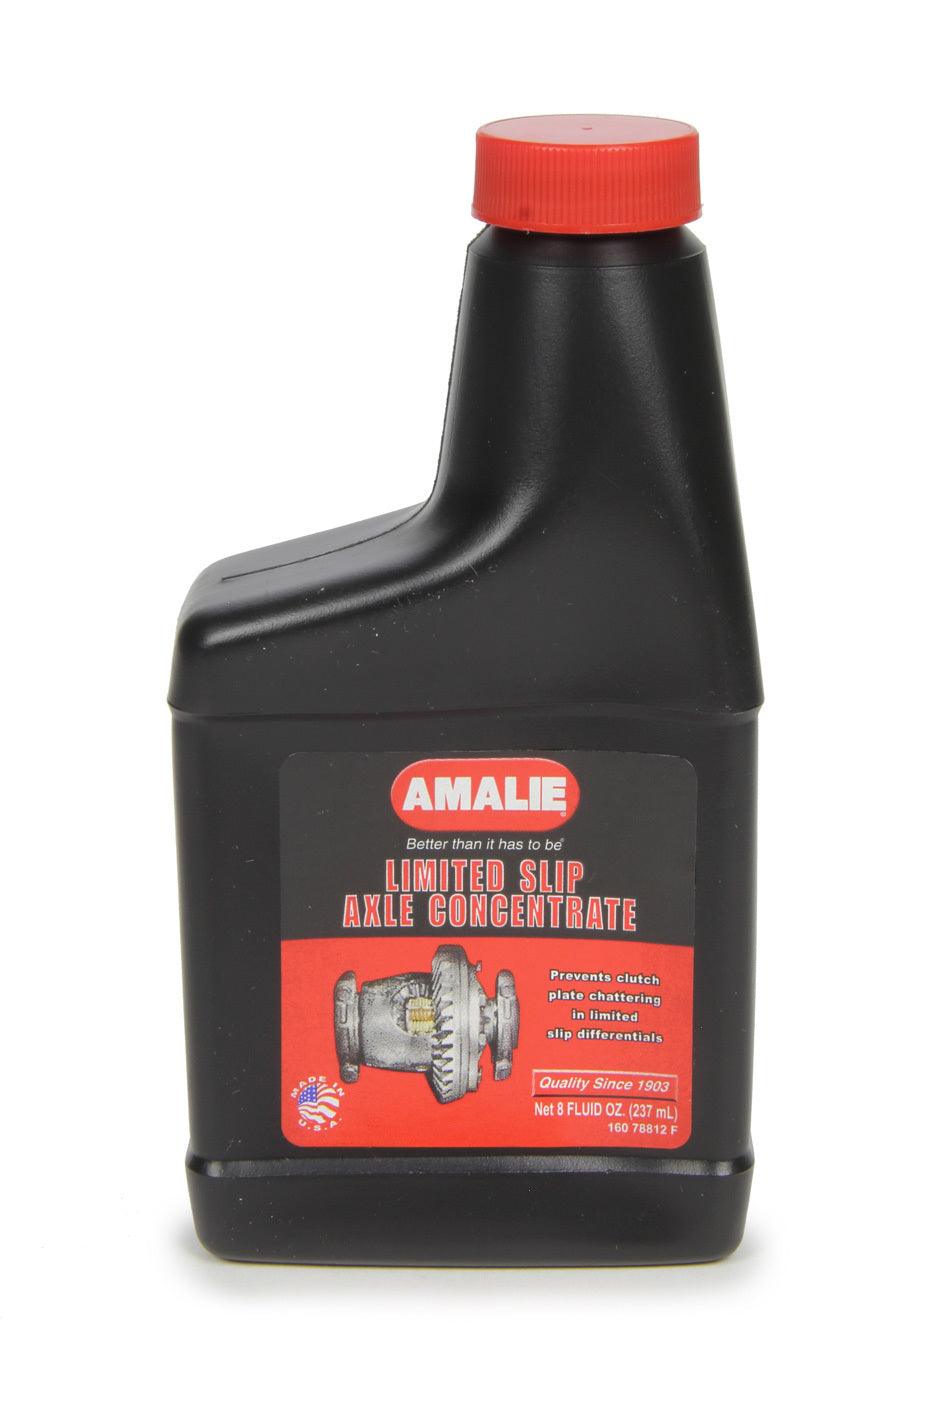 Limited Slip Axle Concen trate Case 8 Oz. - Burlile Performance Products